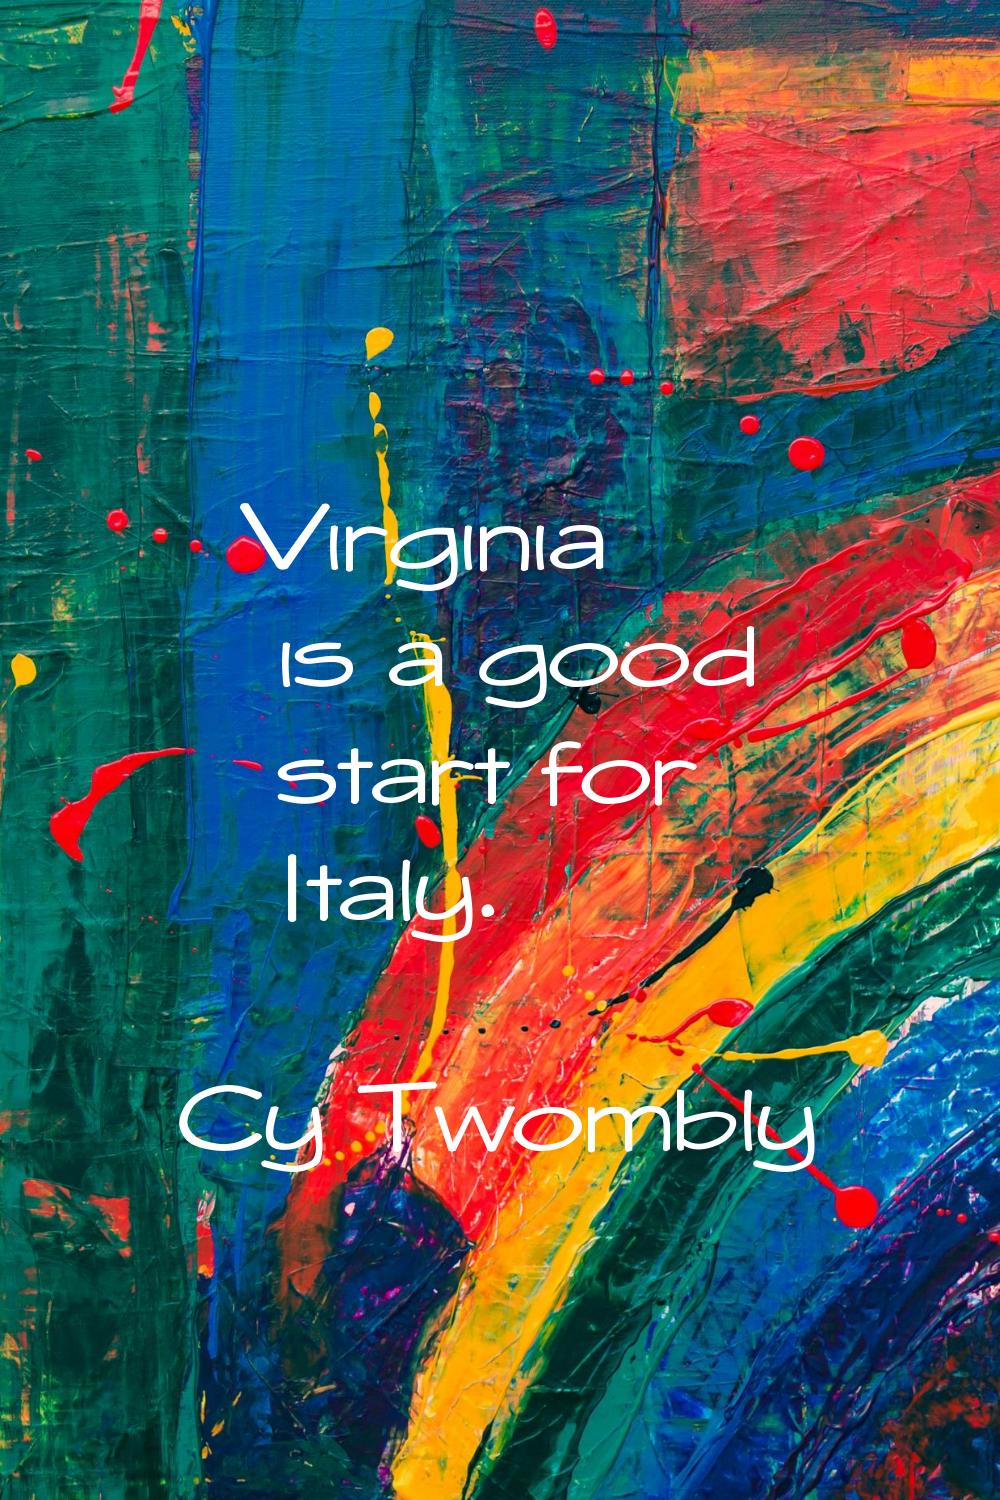 Virginia is a good start for Italy.